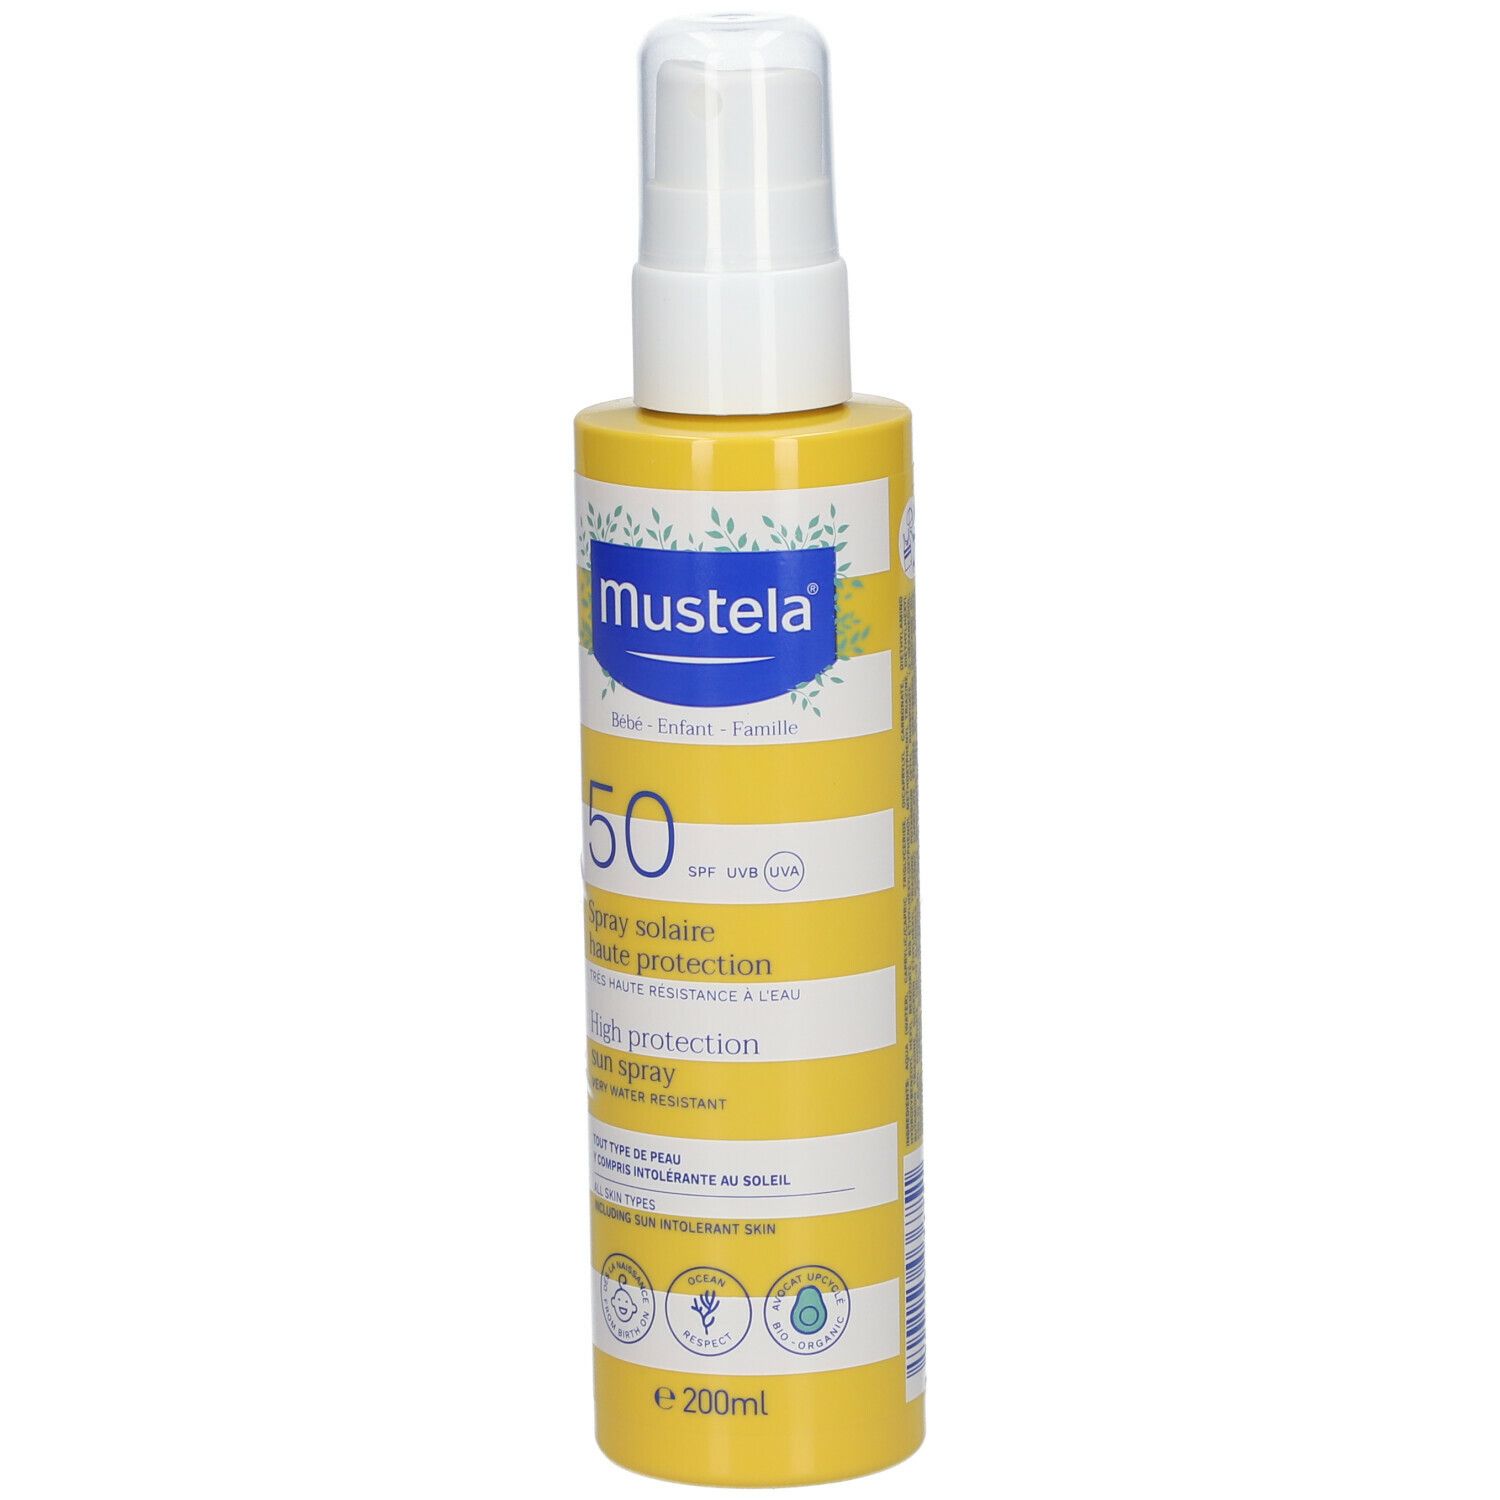 Mustela® Spray Solaire Haute Protection SPF 50